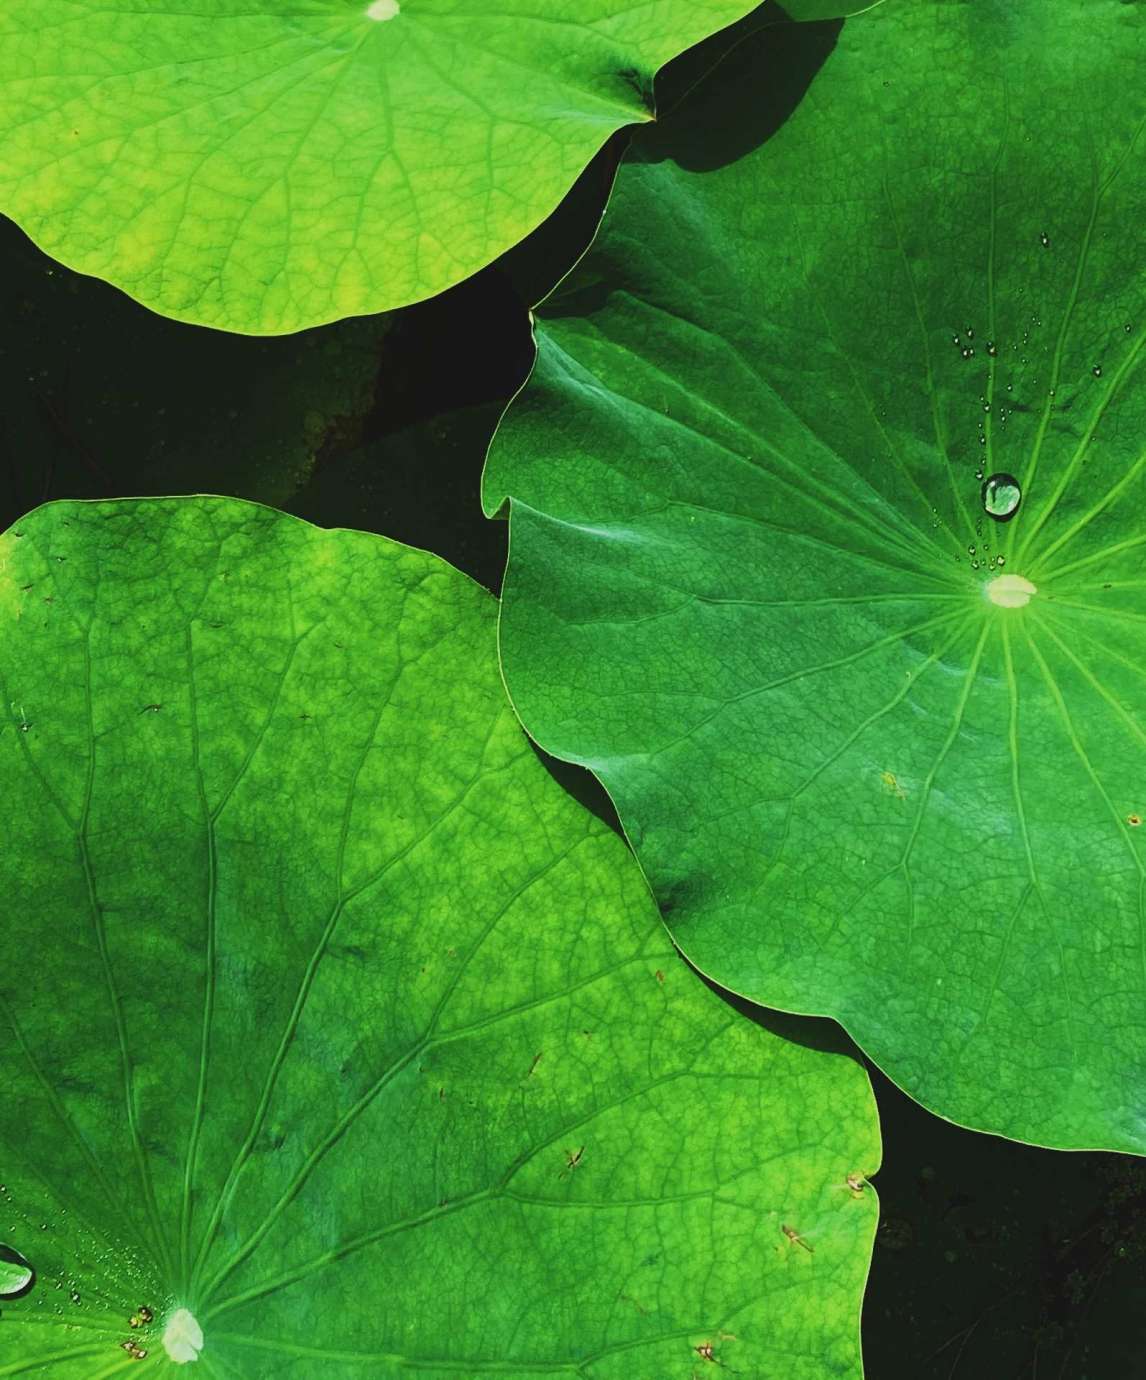 A photograph of a group of bright green lily pads